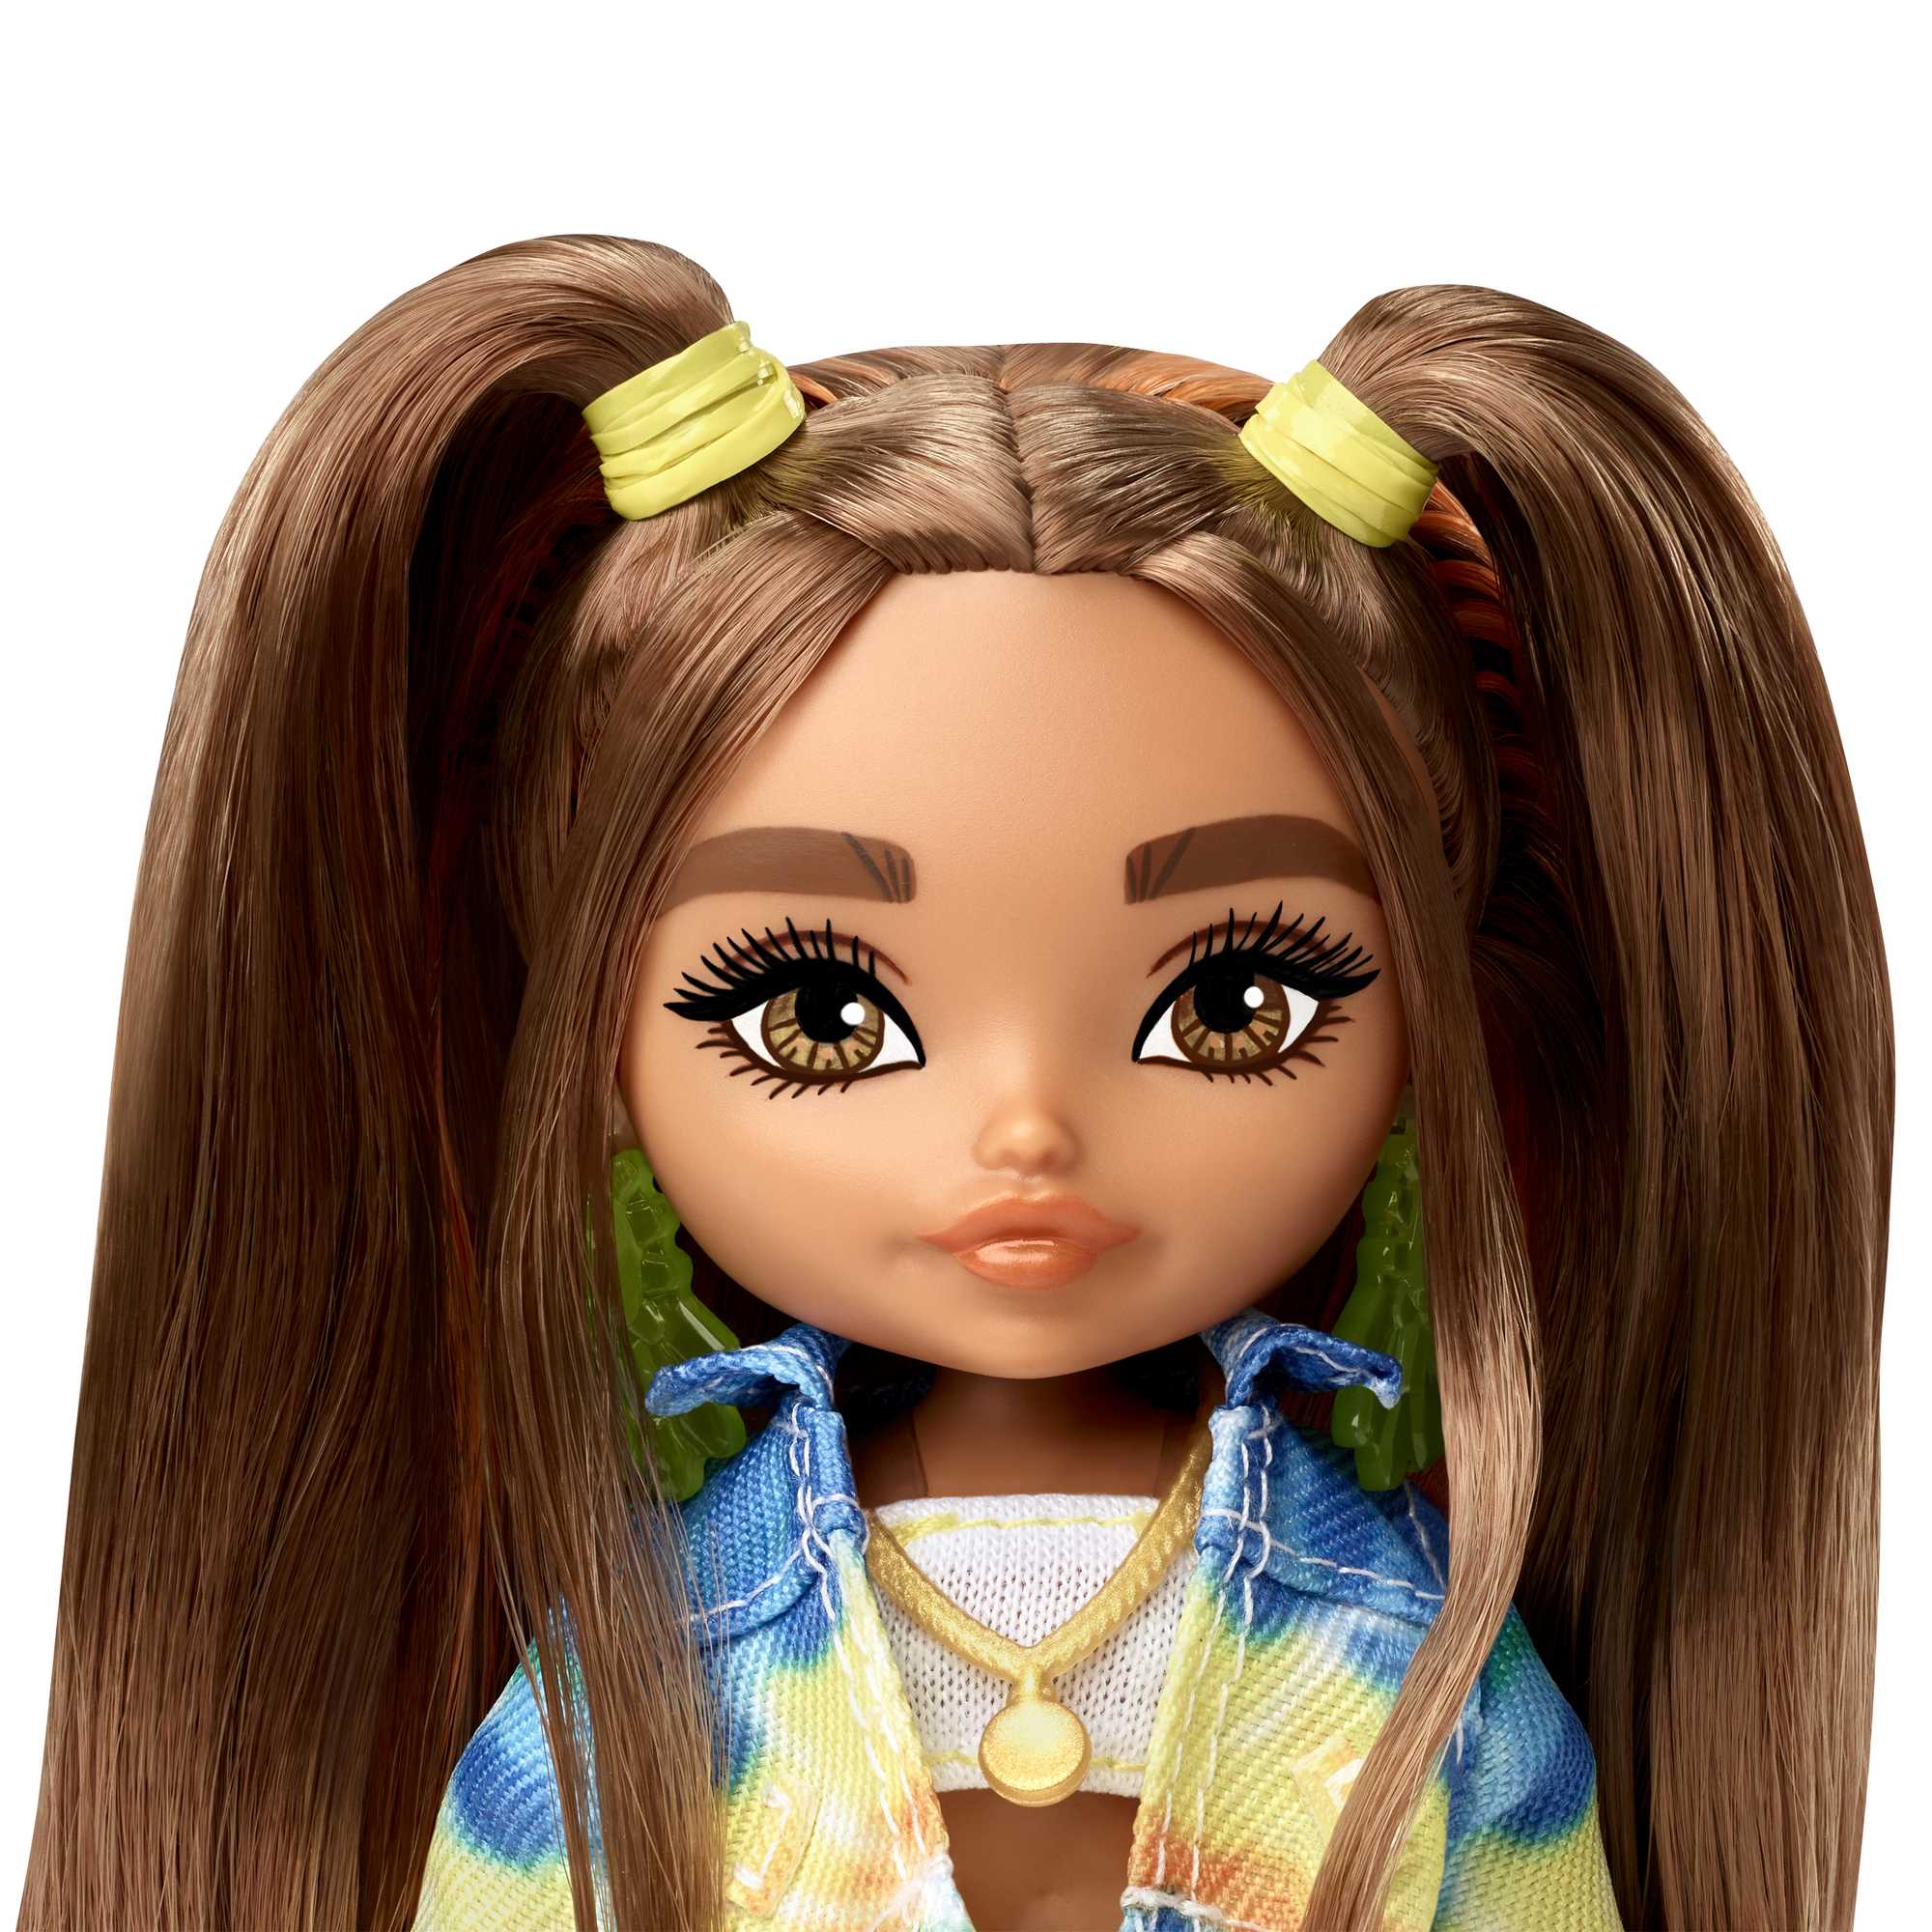 Barbie Extra Minis Doll #5 with Extra-Long Ombre Hair in Tie-Dye Jacket & Shorts with Accessories - image 4 of 6